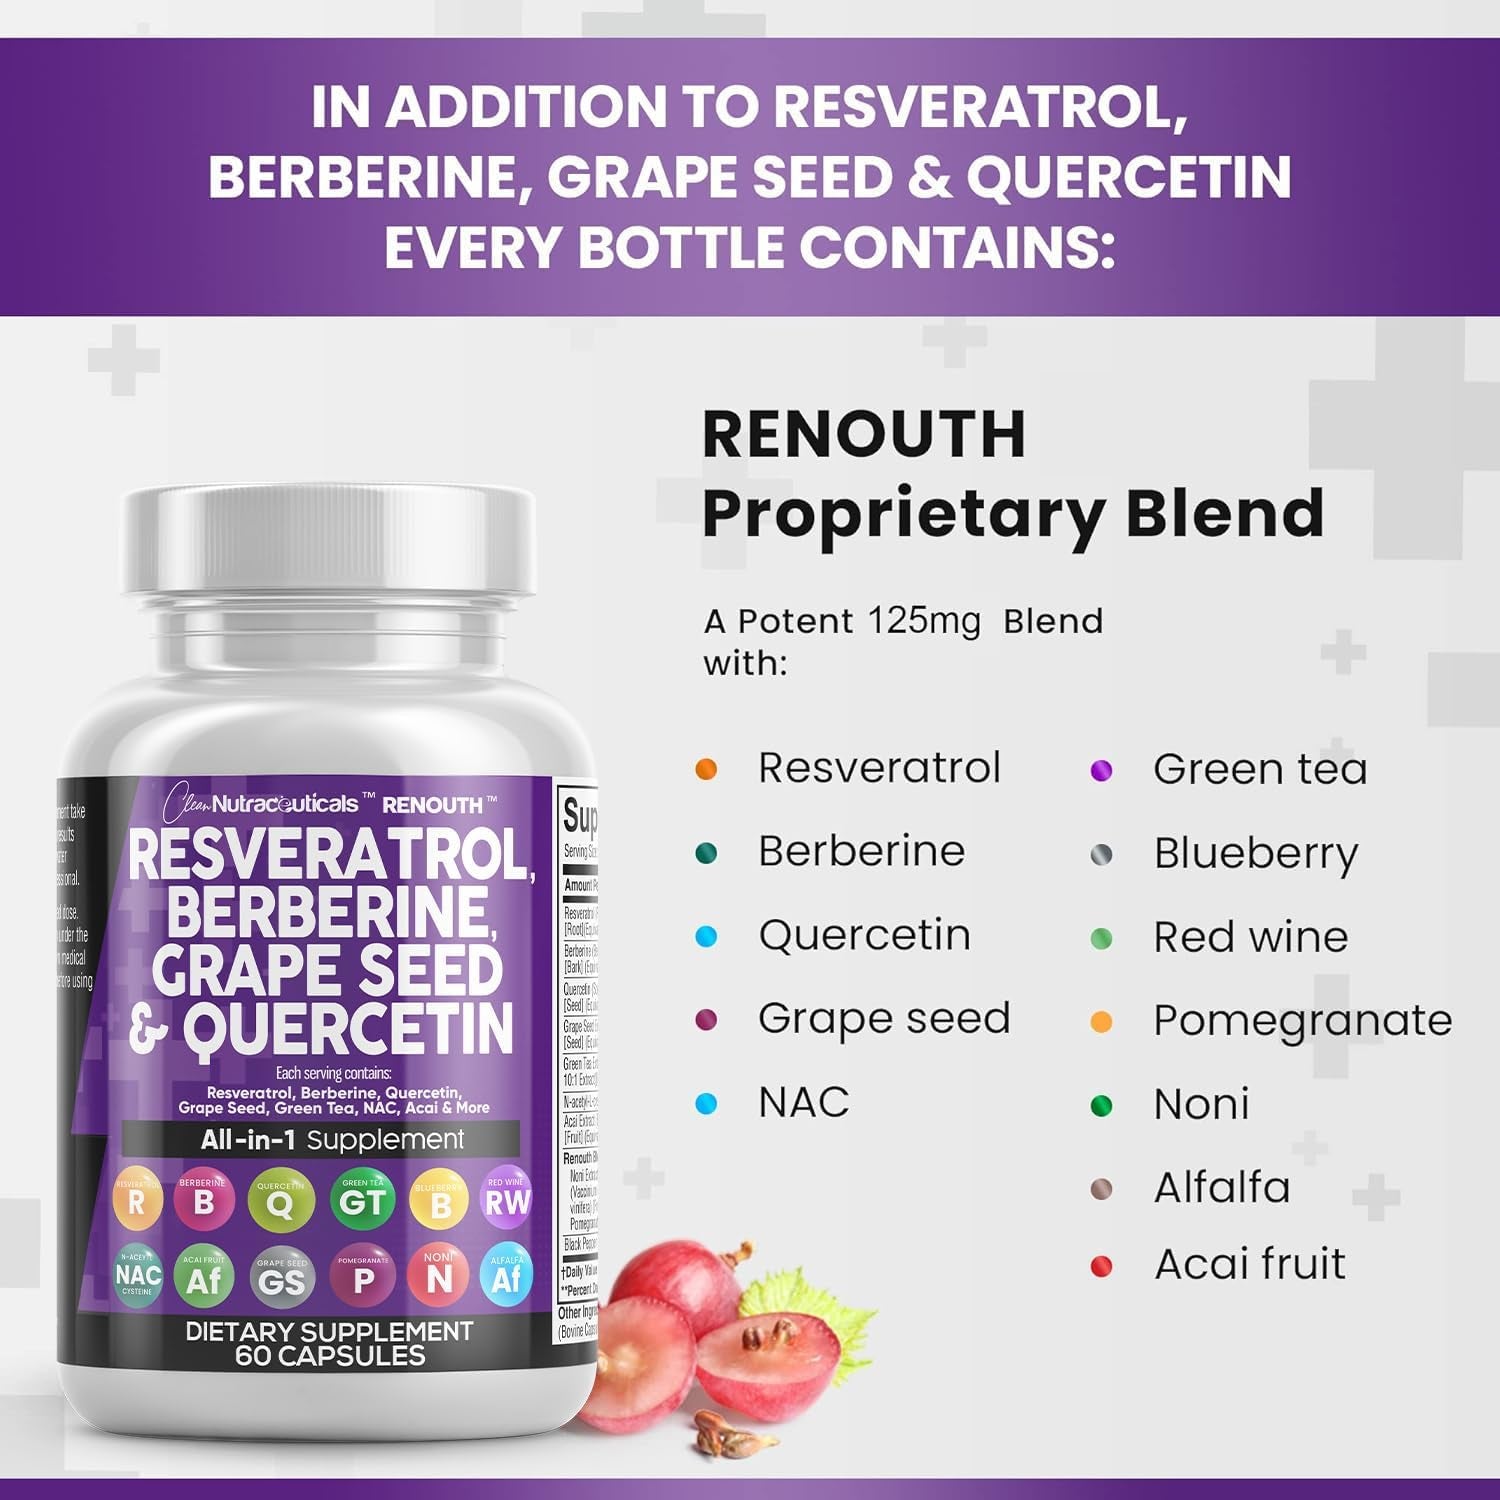 Resveratrol 6000Mg Berberine 3000Mg Grape Seed Extract 3000Mg Quercetin 4000Mg Green Tea Extract - Polyphenol Supplement for Women and Men with N-Acetyl Cysteine, Acai Extract - 60 Capsules